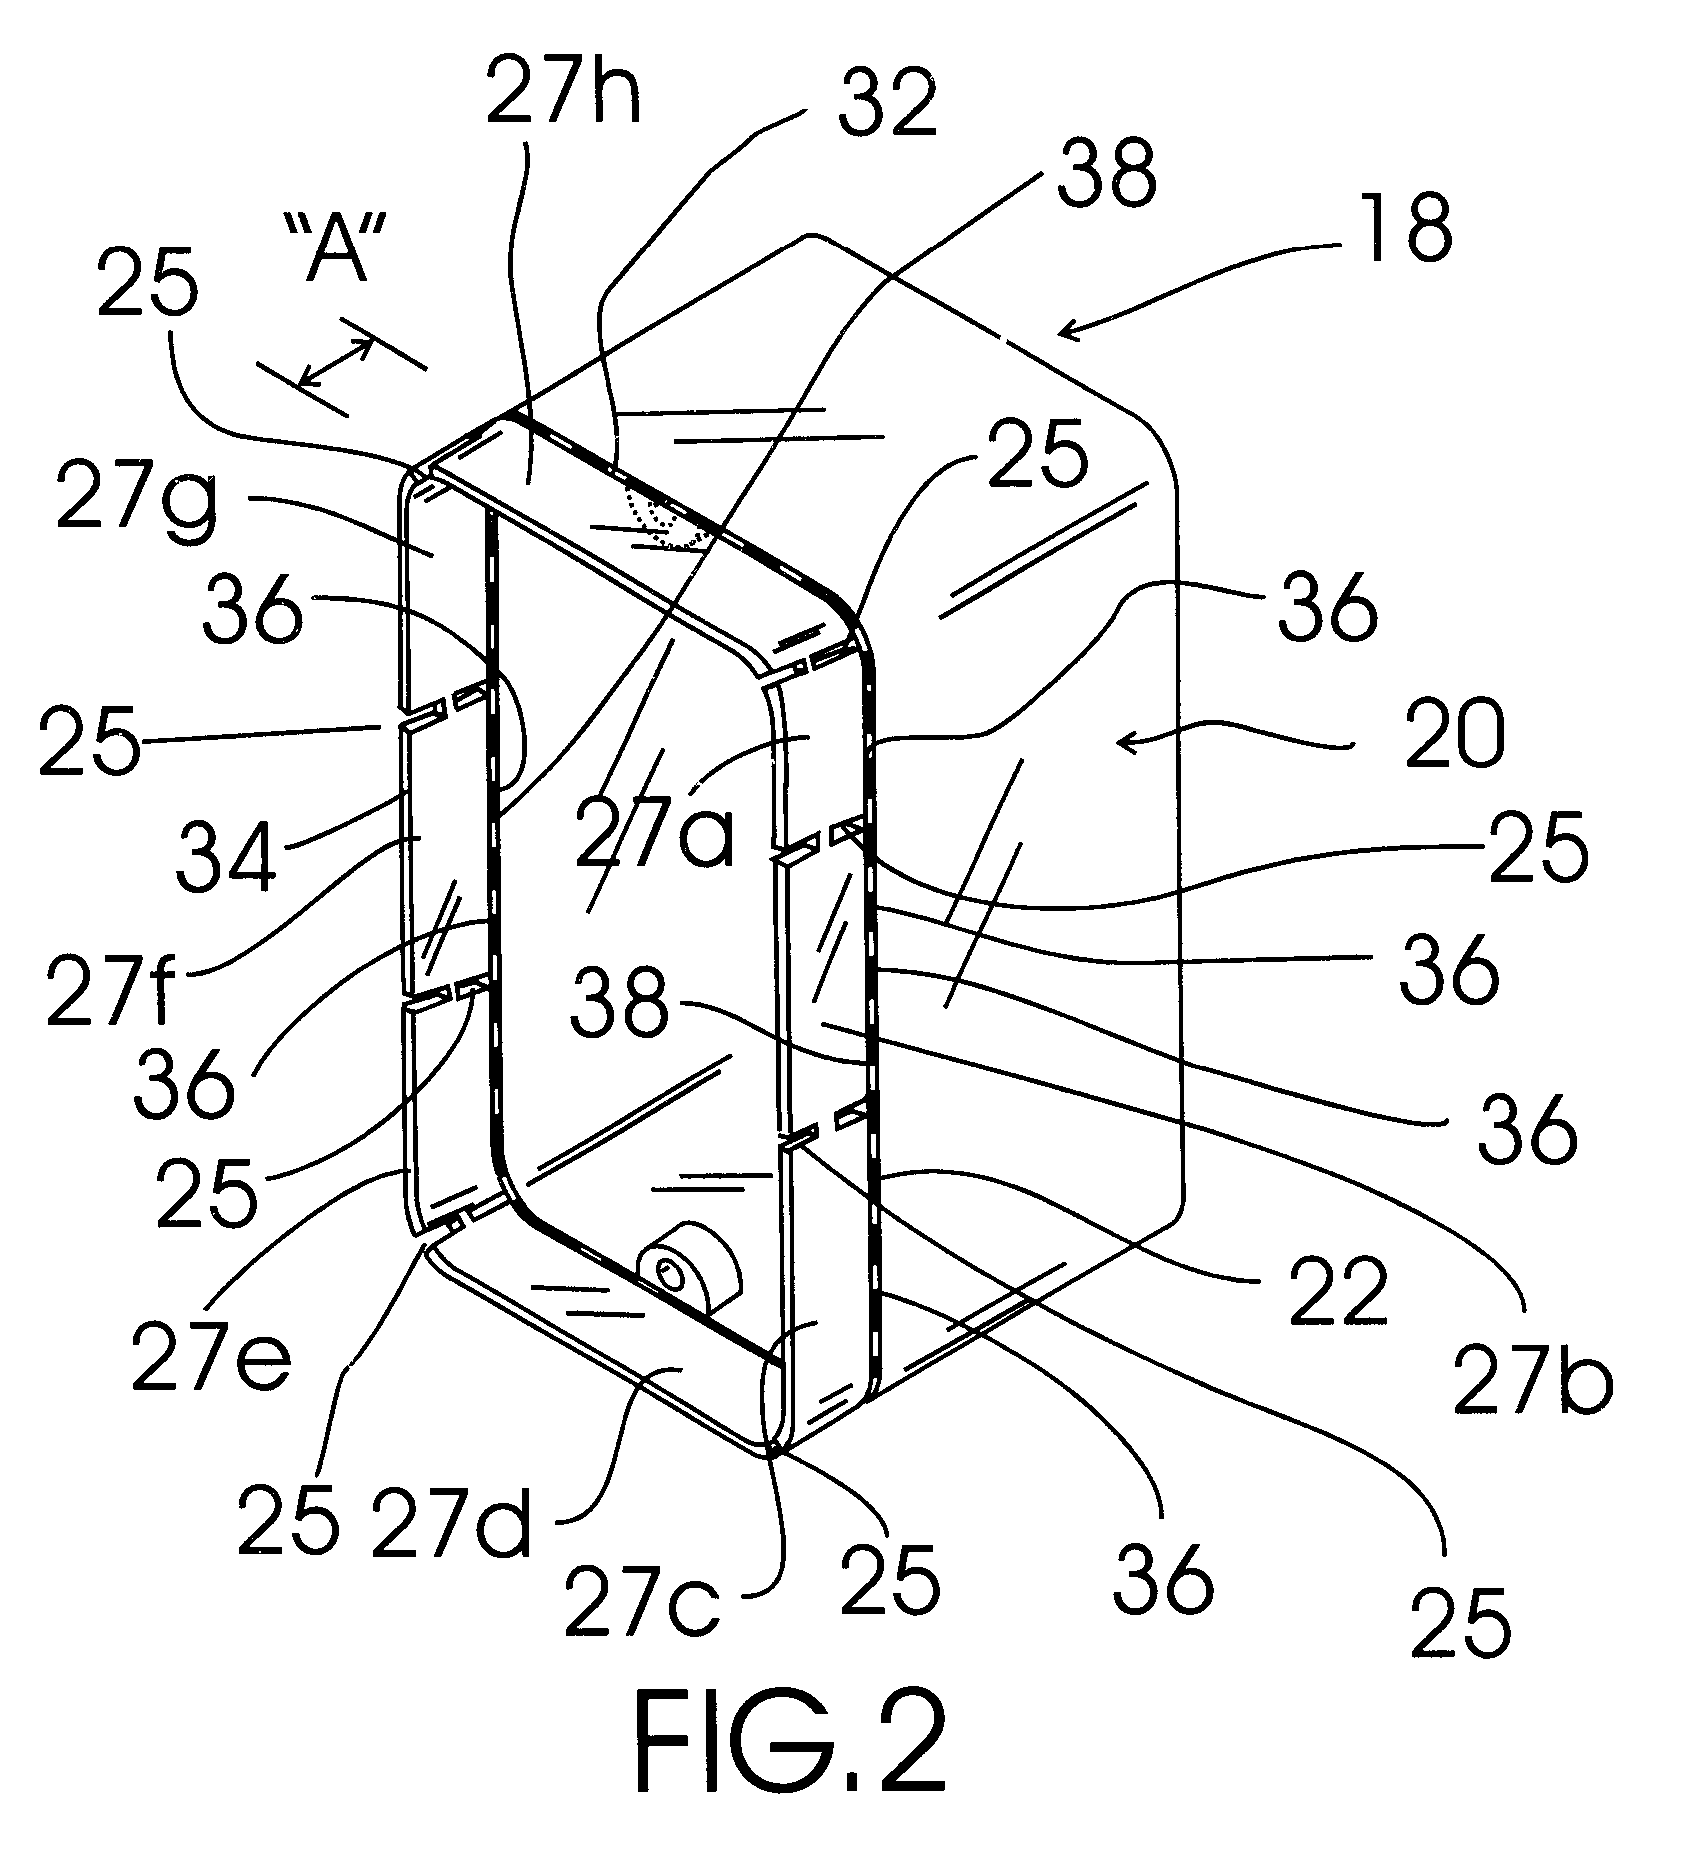 Electrical connection box having a break away shielding structure